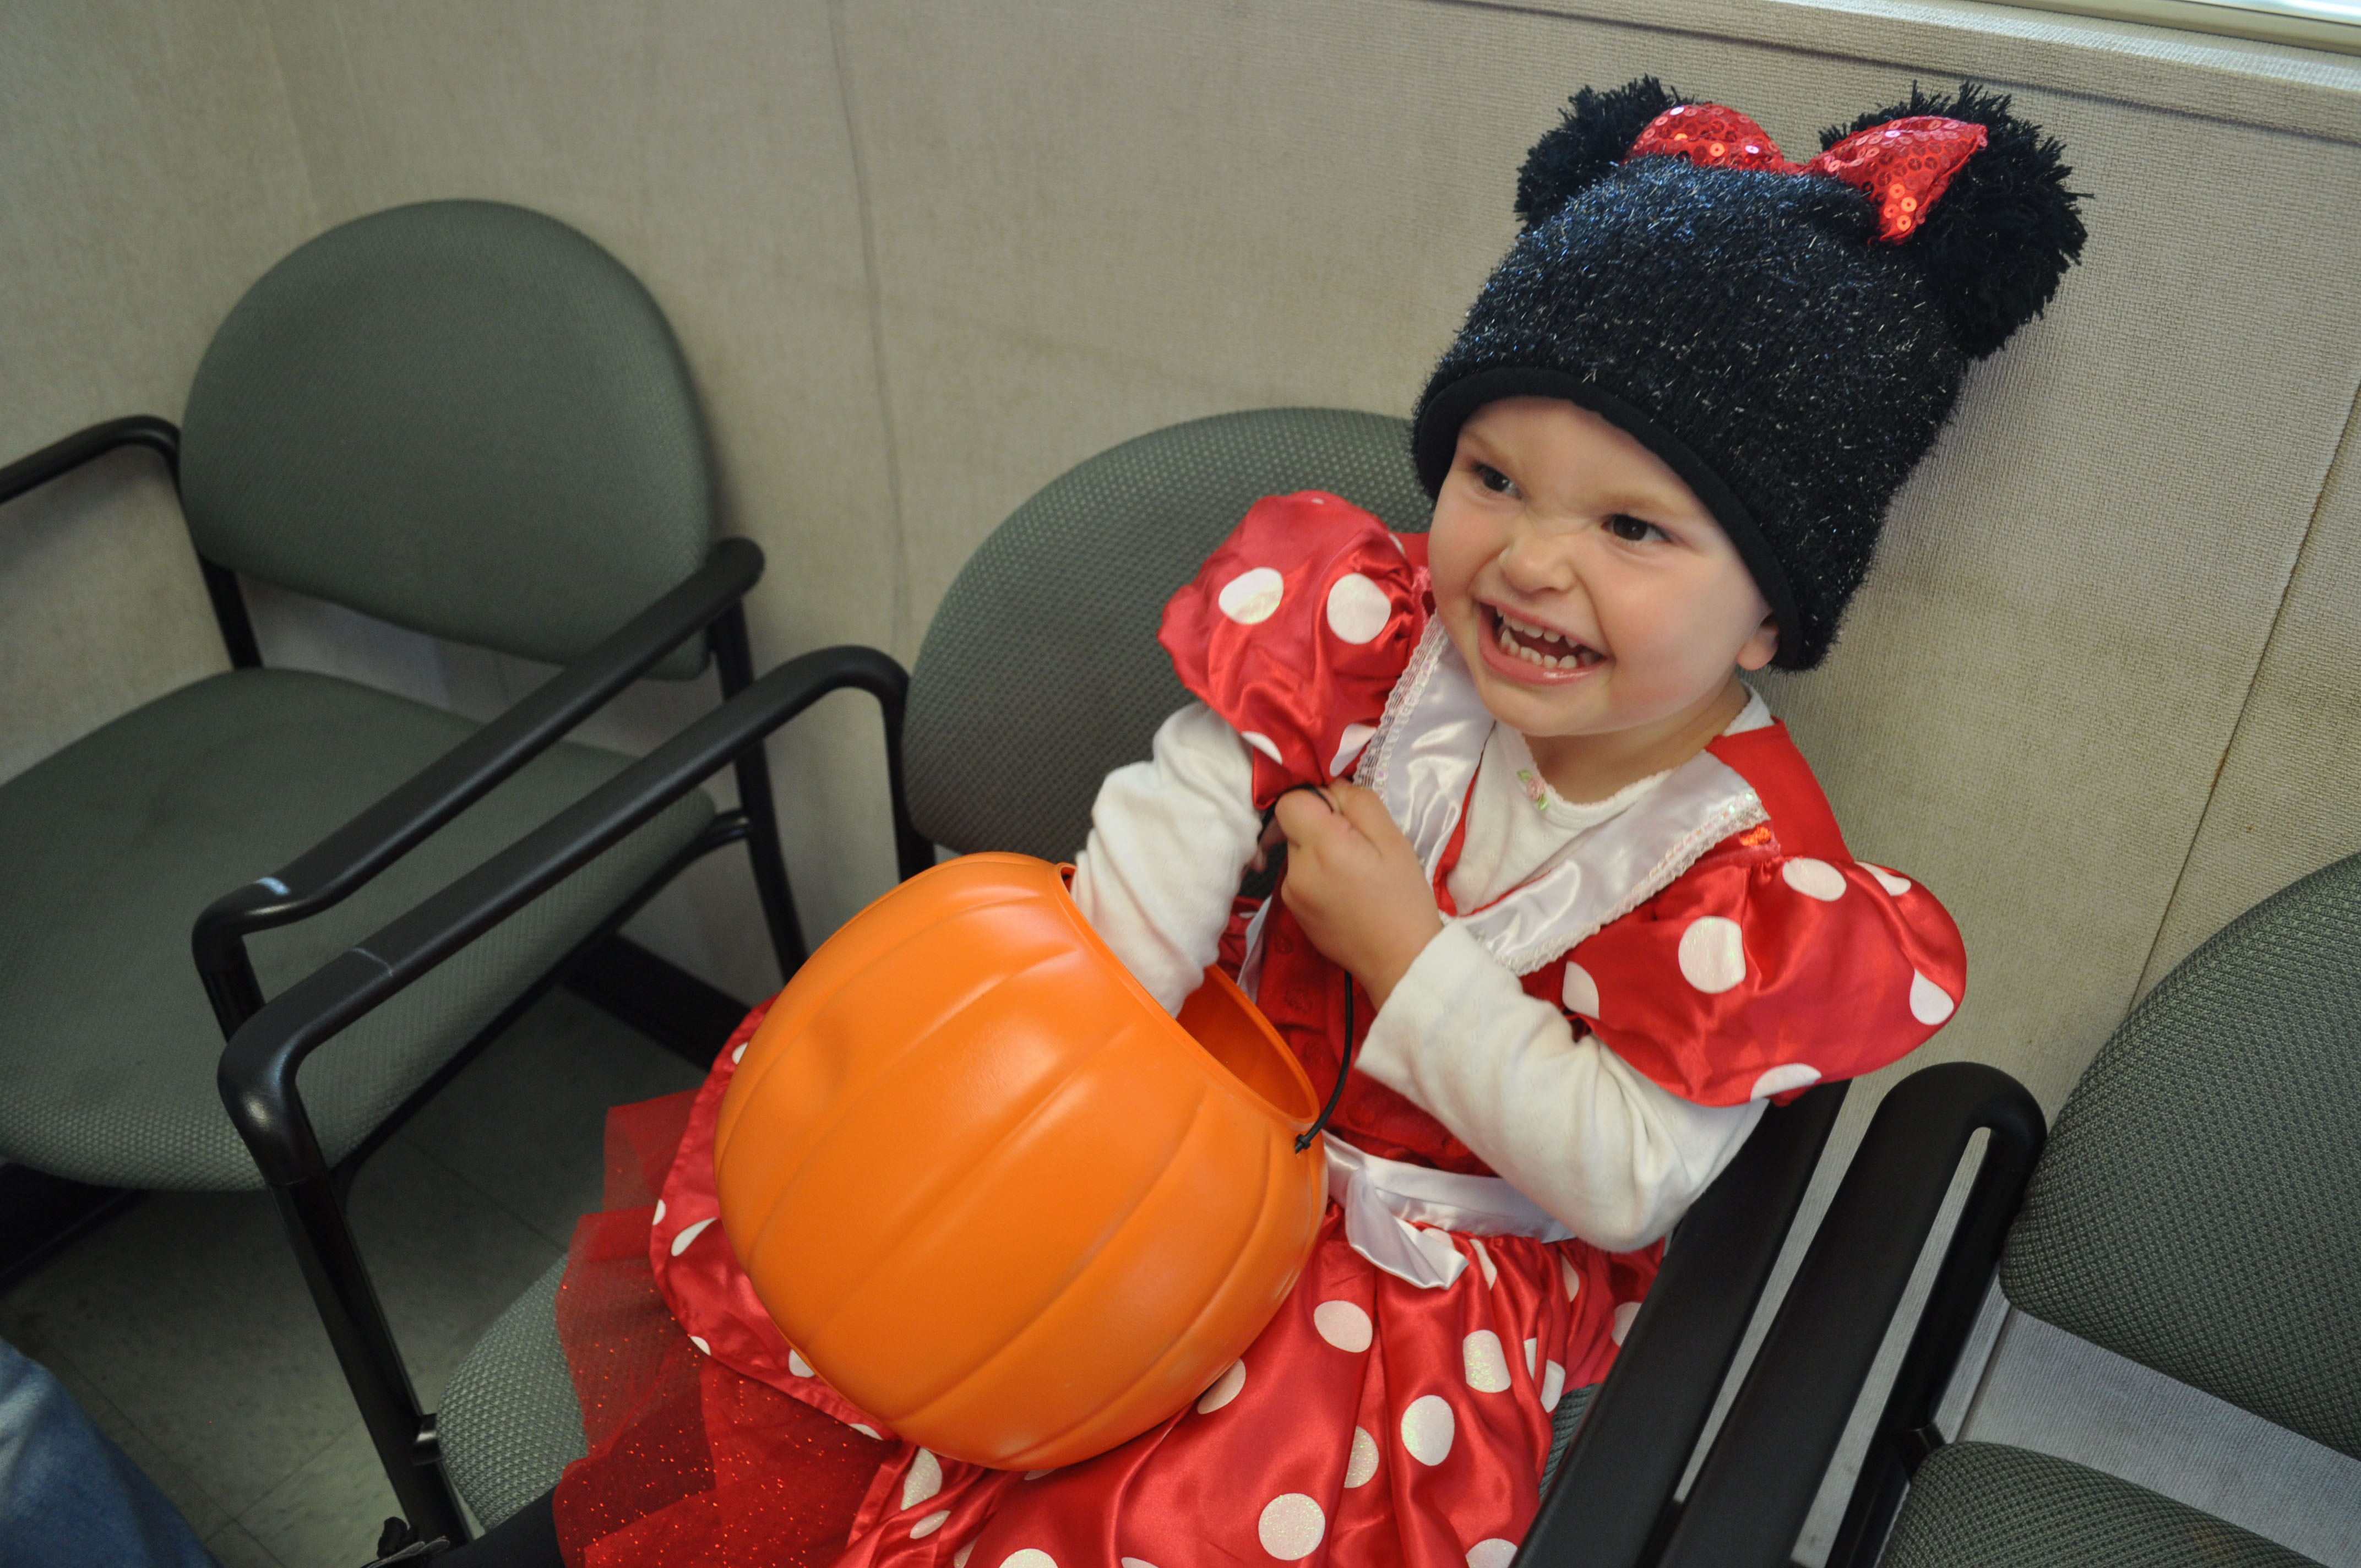 Chanel, dressed as Minnie Mouse, reaches into her basket for more candy at the Extended Opportunity Programs and Services building while trick-or-treating.